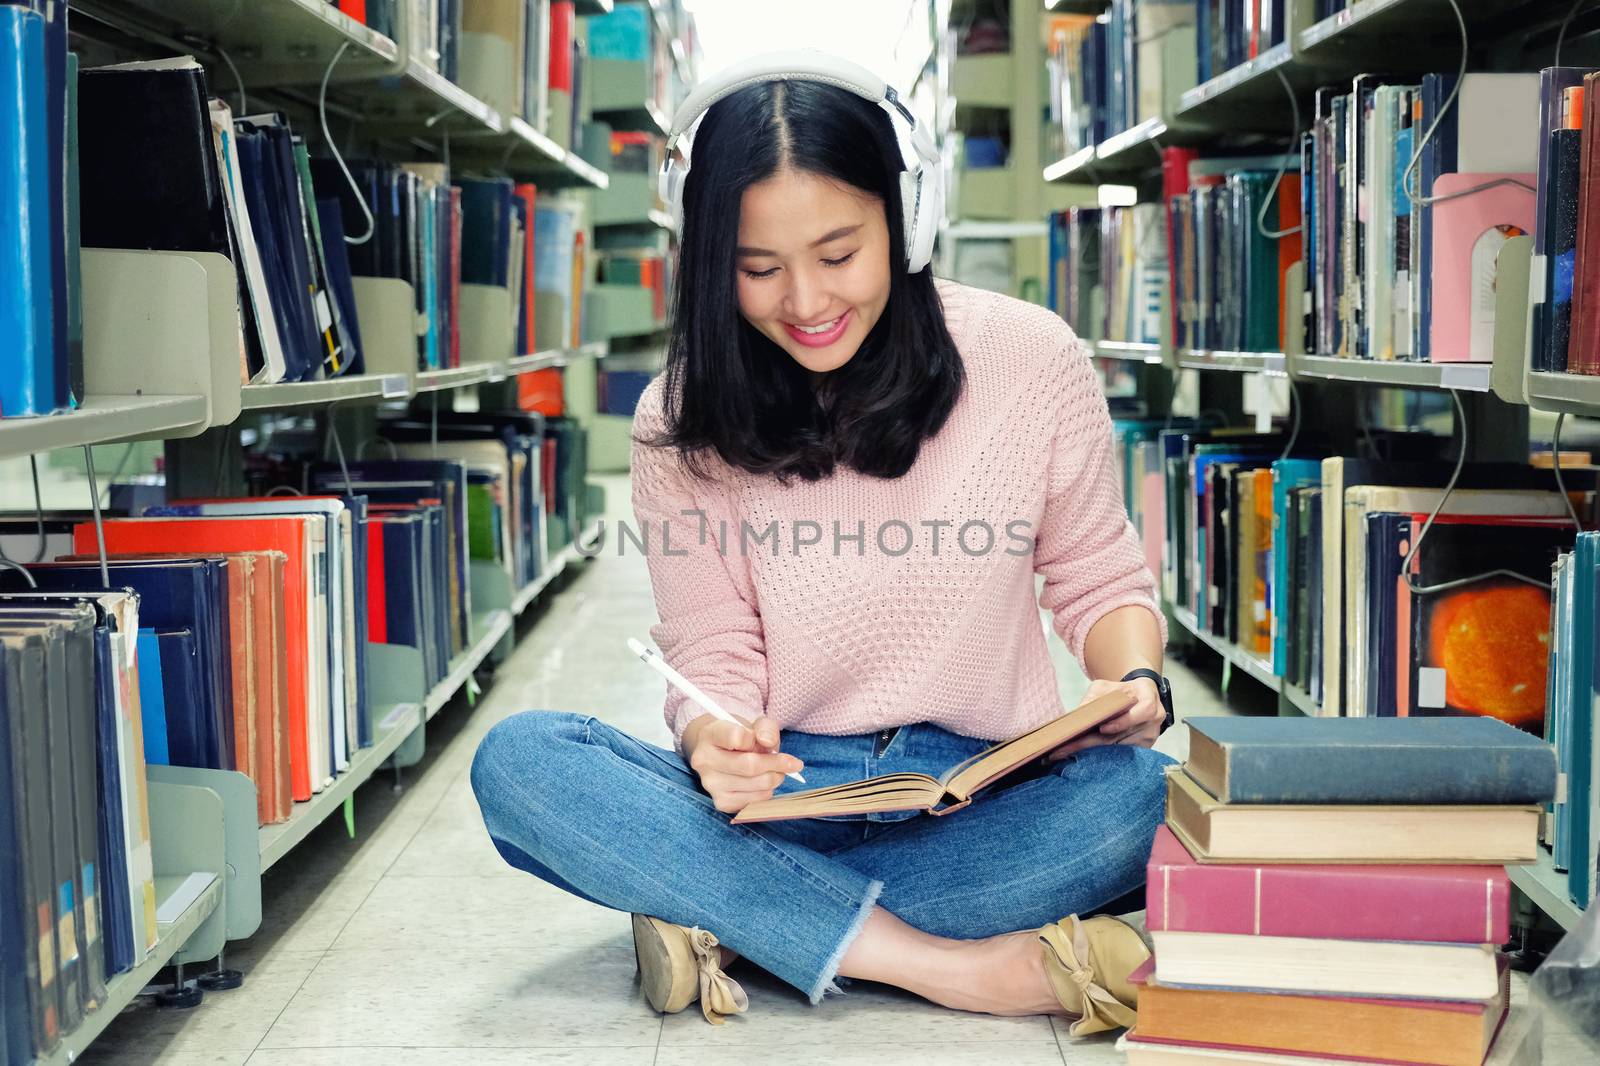 Young woman in a good mood listening to music  while studying in a library